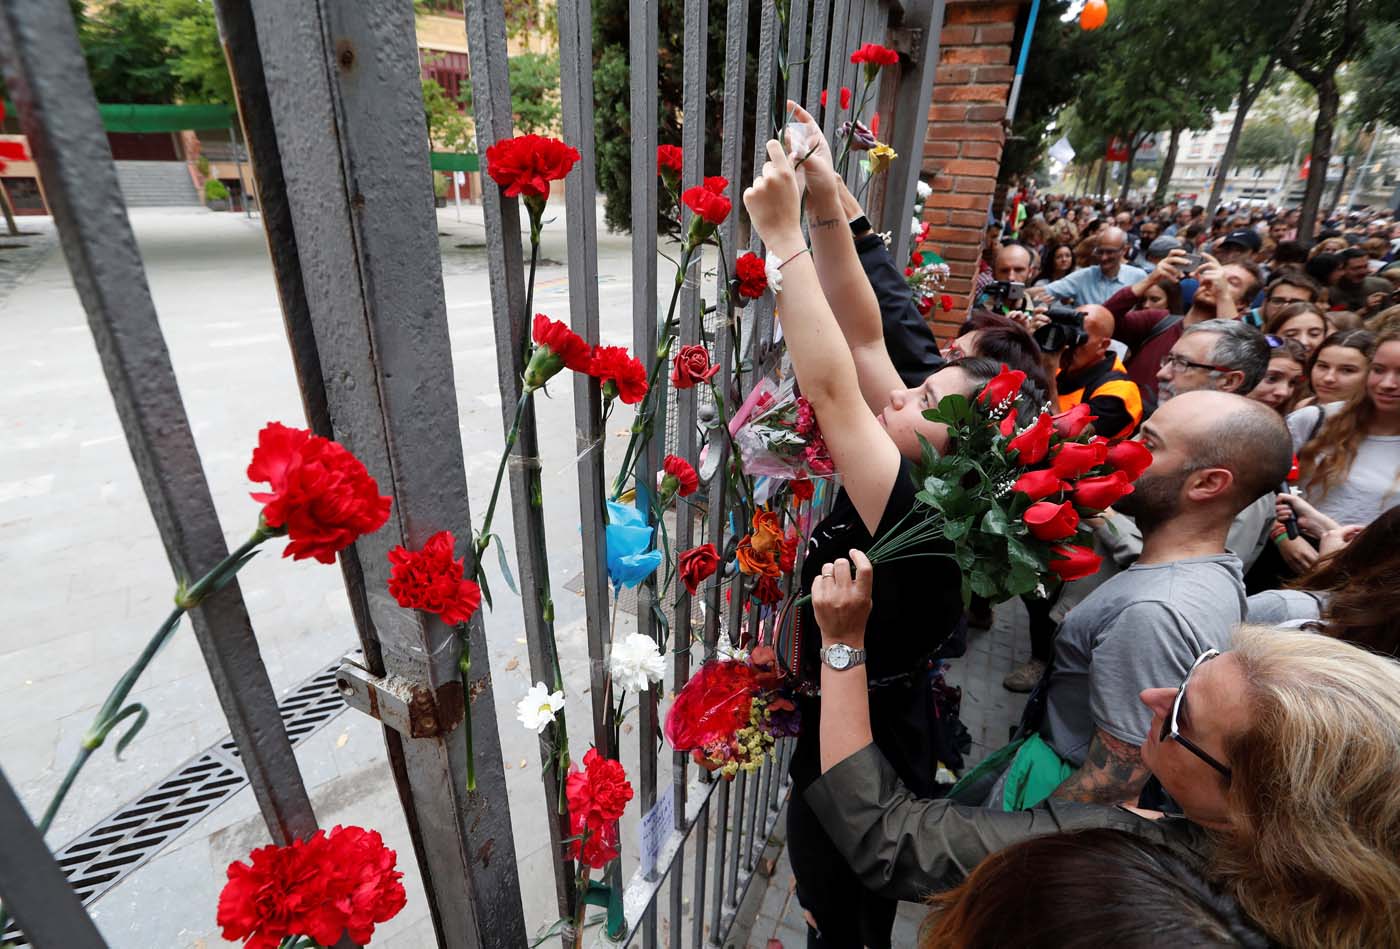 People place flowers on the gate of the Ramon Llull high school where Spanish police clashed with voters in the banned referendum in Barcelona, Spain October 3, 2017. REUTERS/Yves Herman